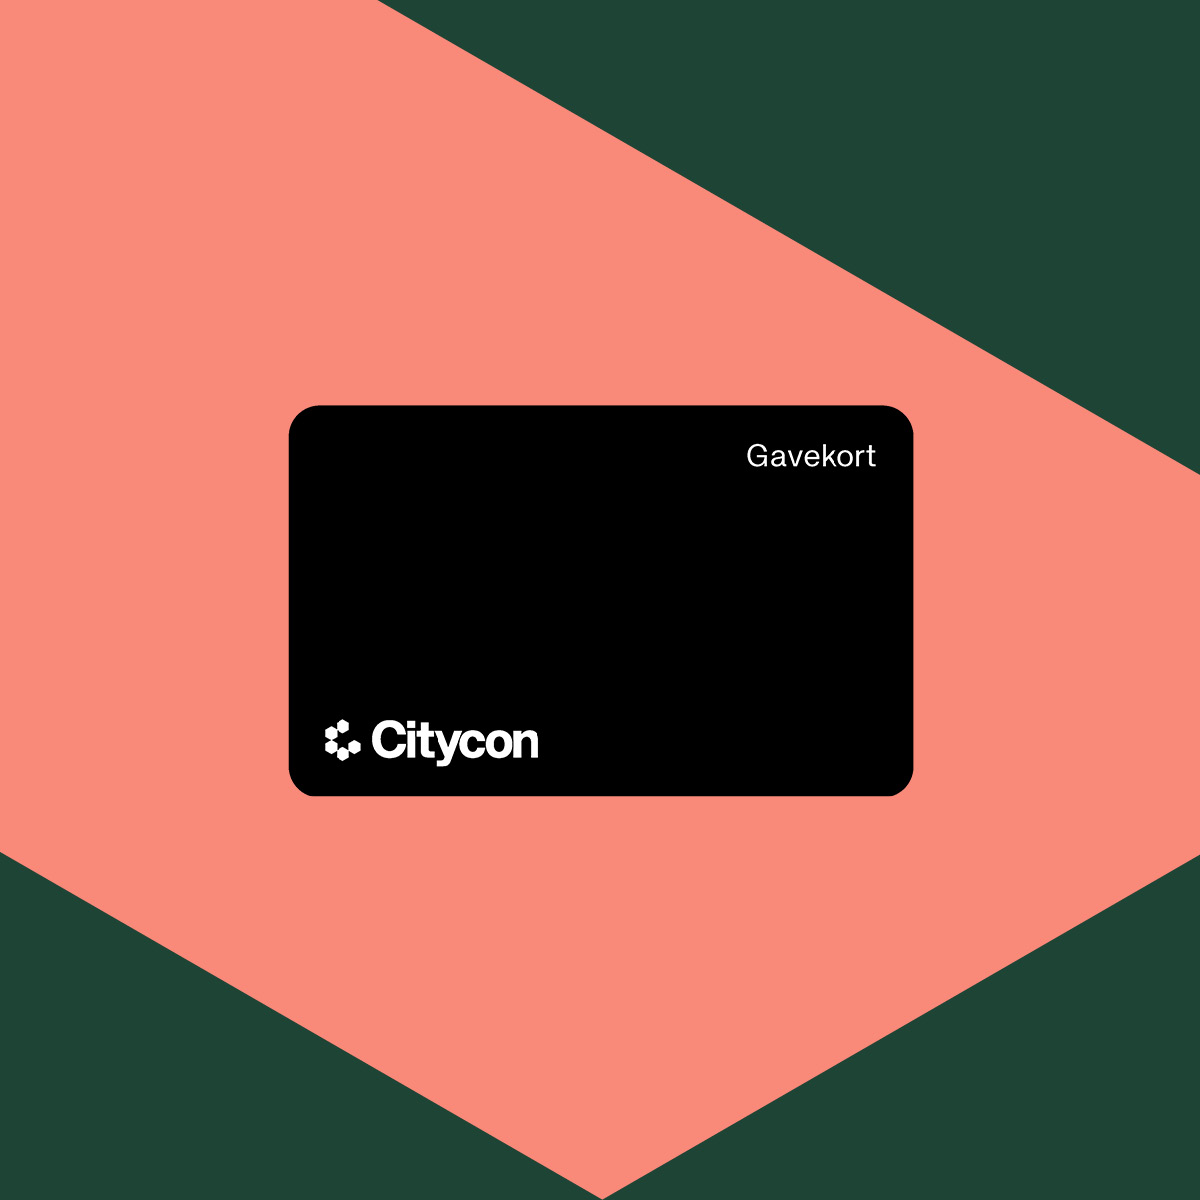 CINC_Webpage_Banners_Sub-page_giftcard_lift-section_NOR_CoralGreen.jpg